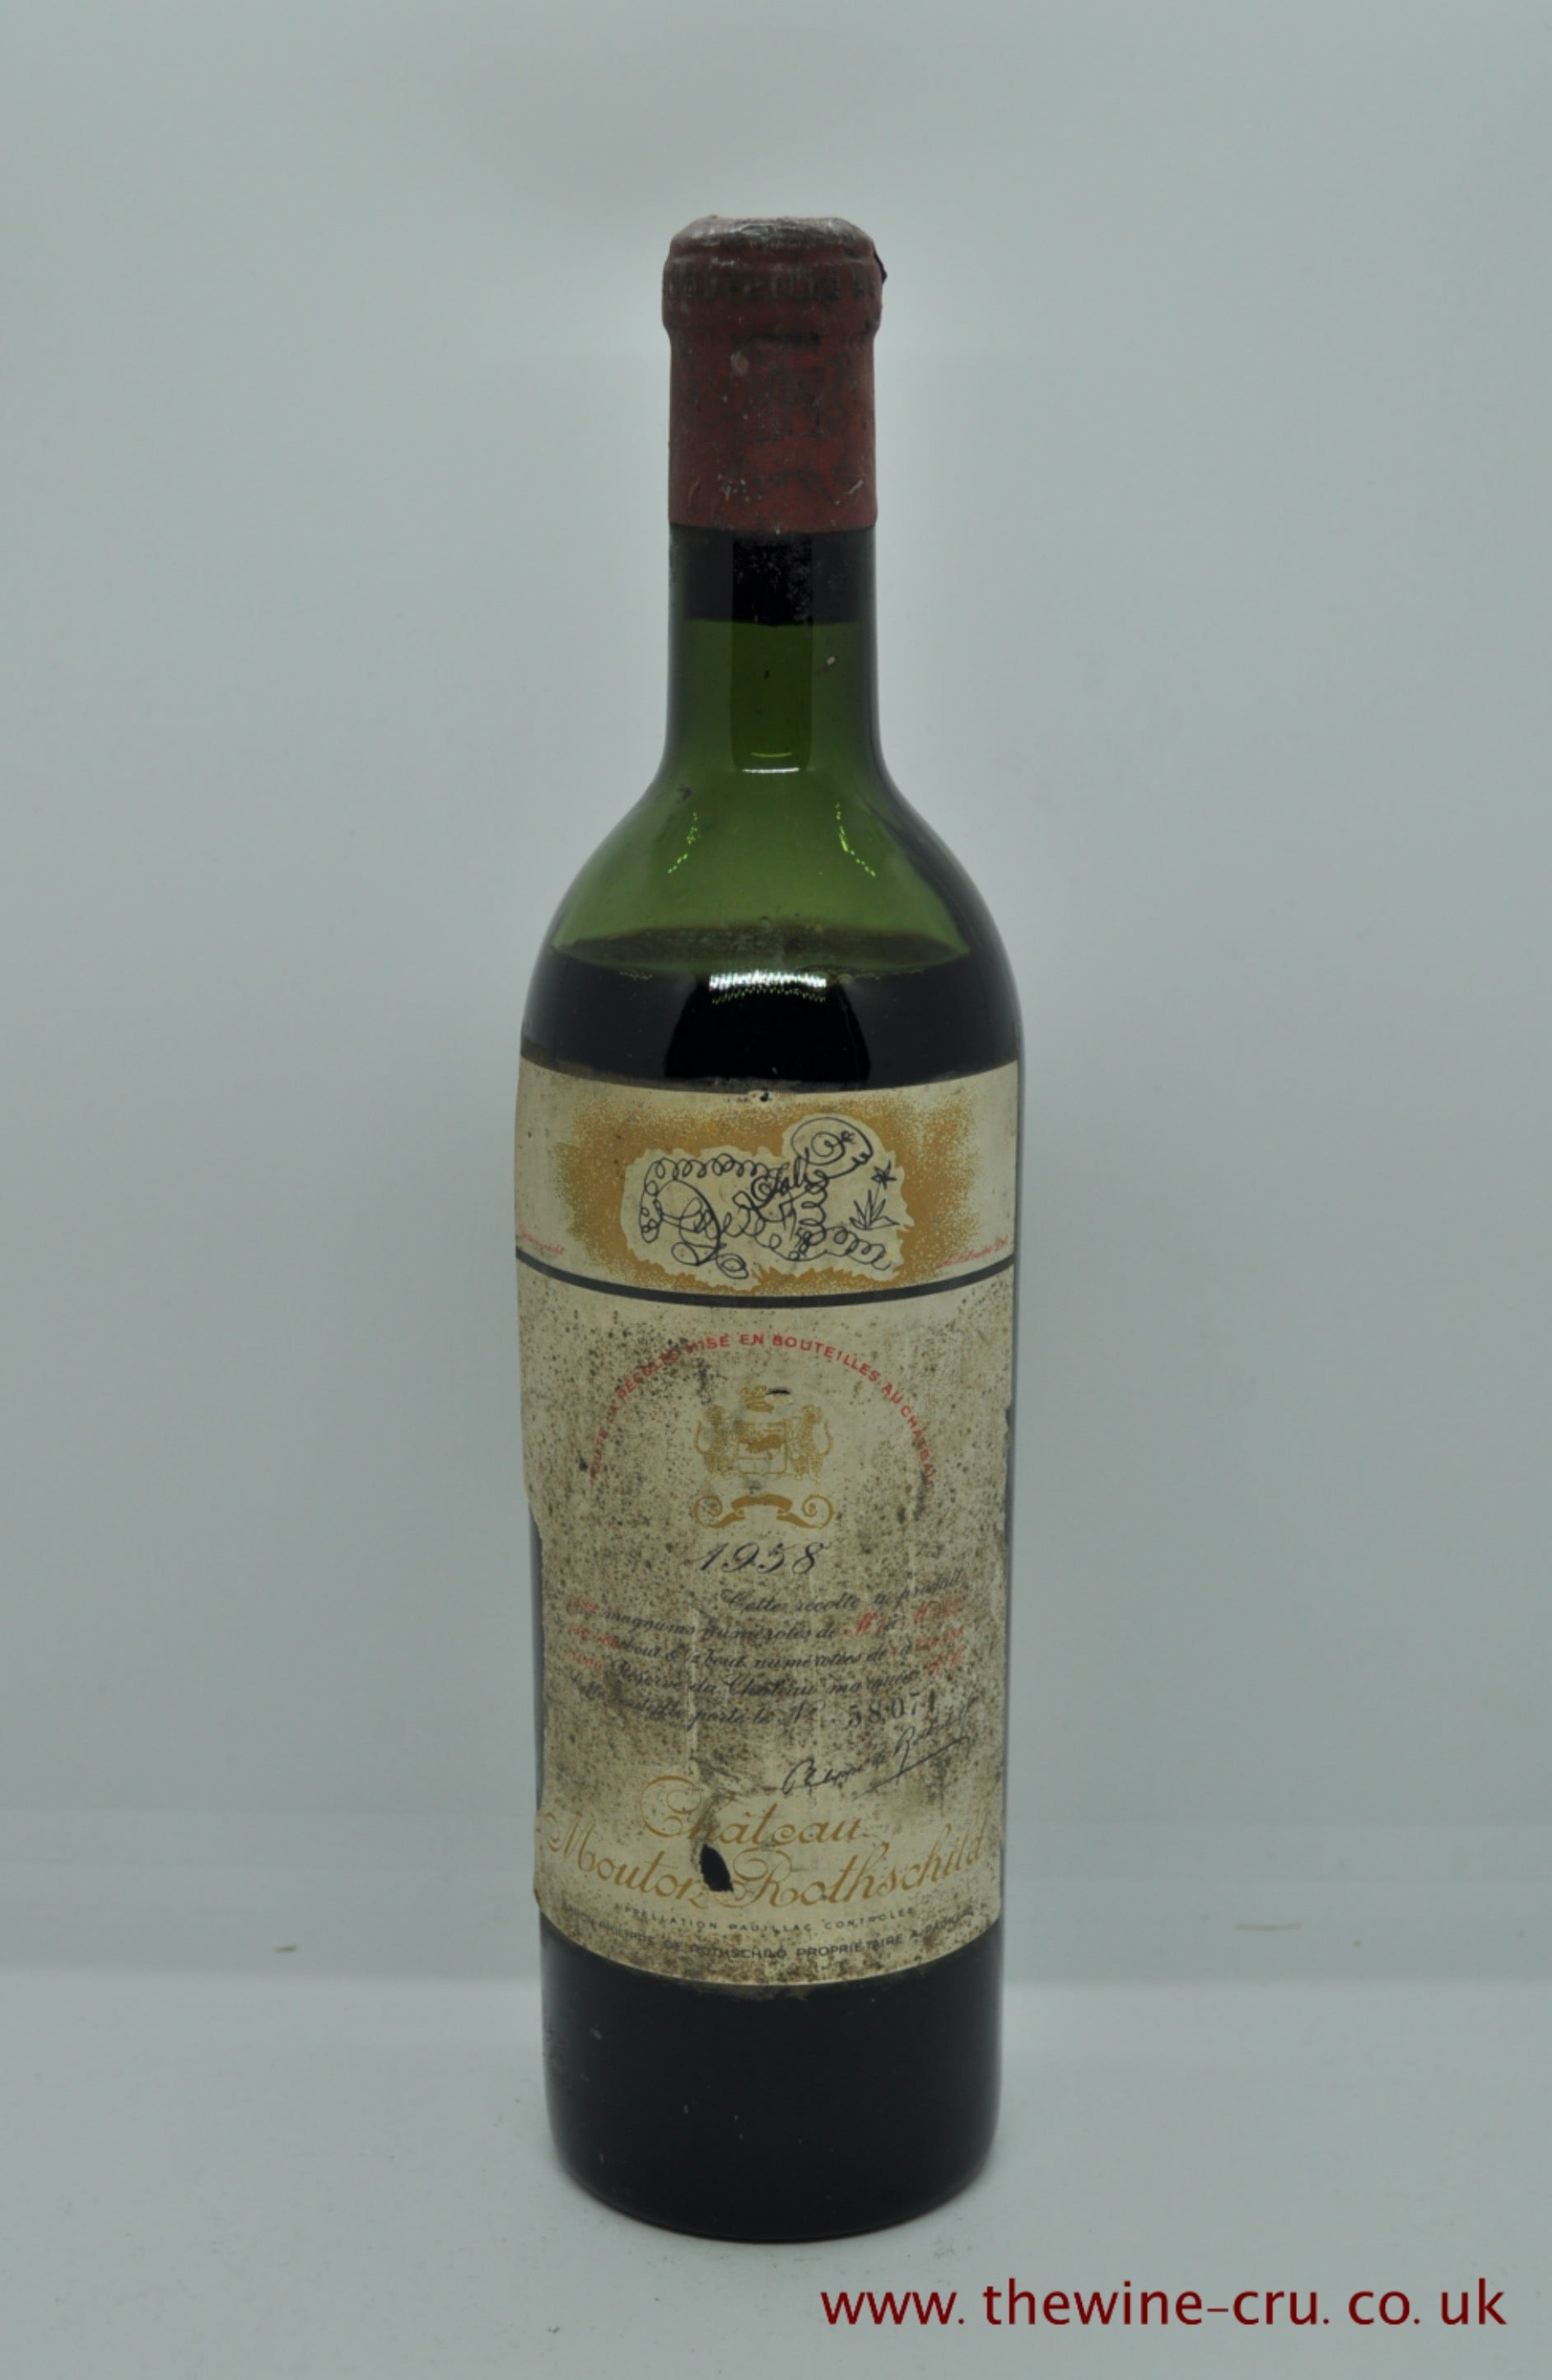 A bottle of 1958 vintage red wine. Chateau Mouton Rothschild. Bordeaux, France. The capsule has a little corrosion, the label complete but bins oiled. The wine level is low shoulder. Immediate delivery. Free local delivery. Gift wrapping available.